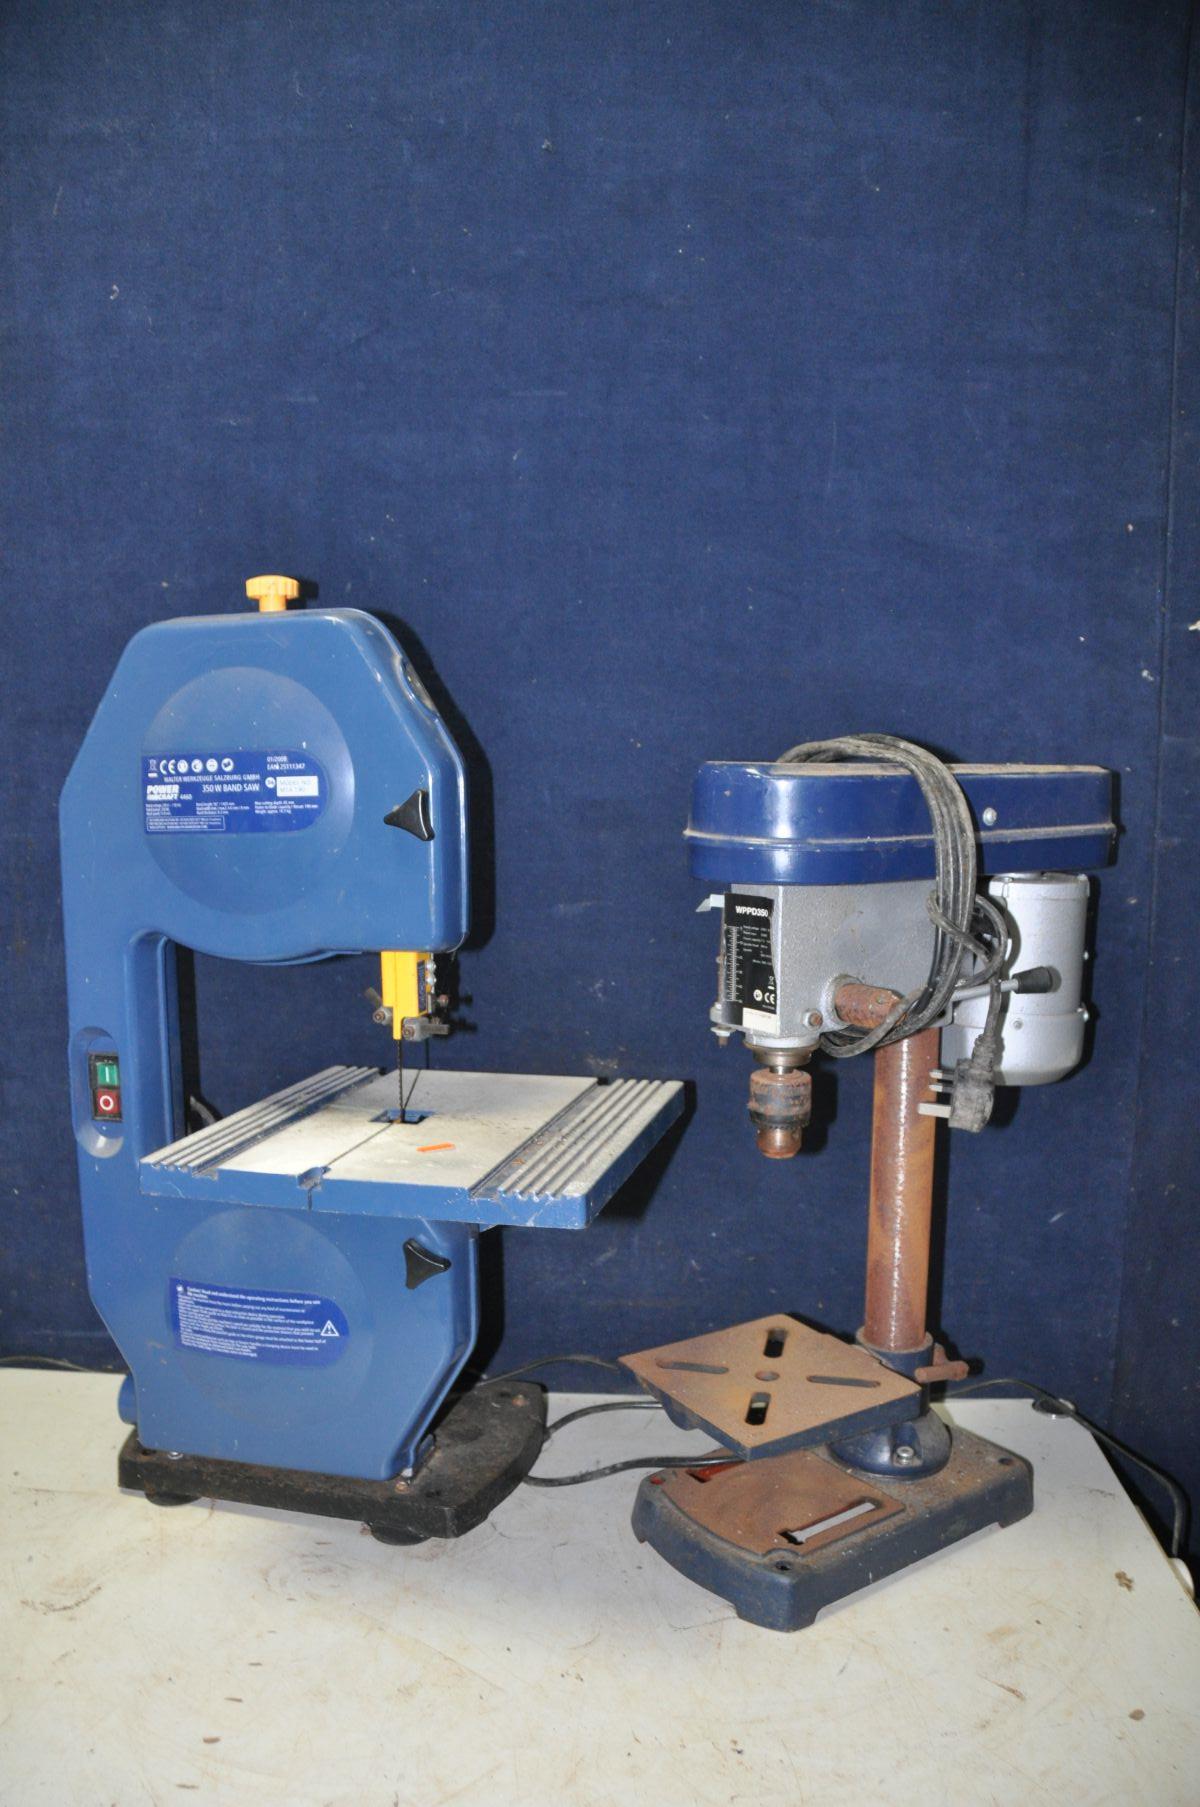 A POWER CRAFT M1A190 band saw along with a pillar drill (no branding visible) model No WPPD350 (both